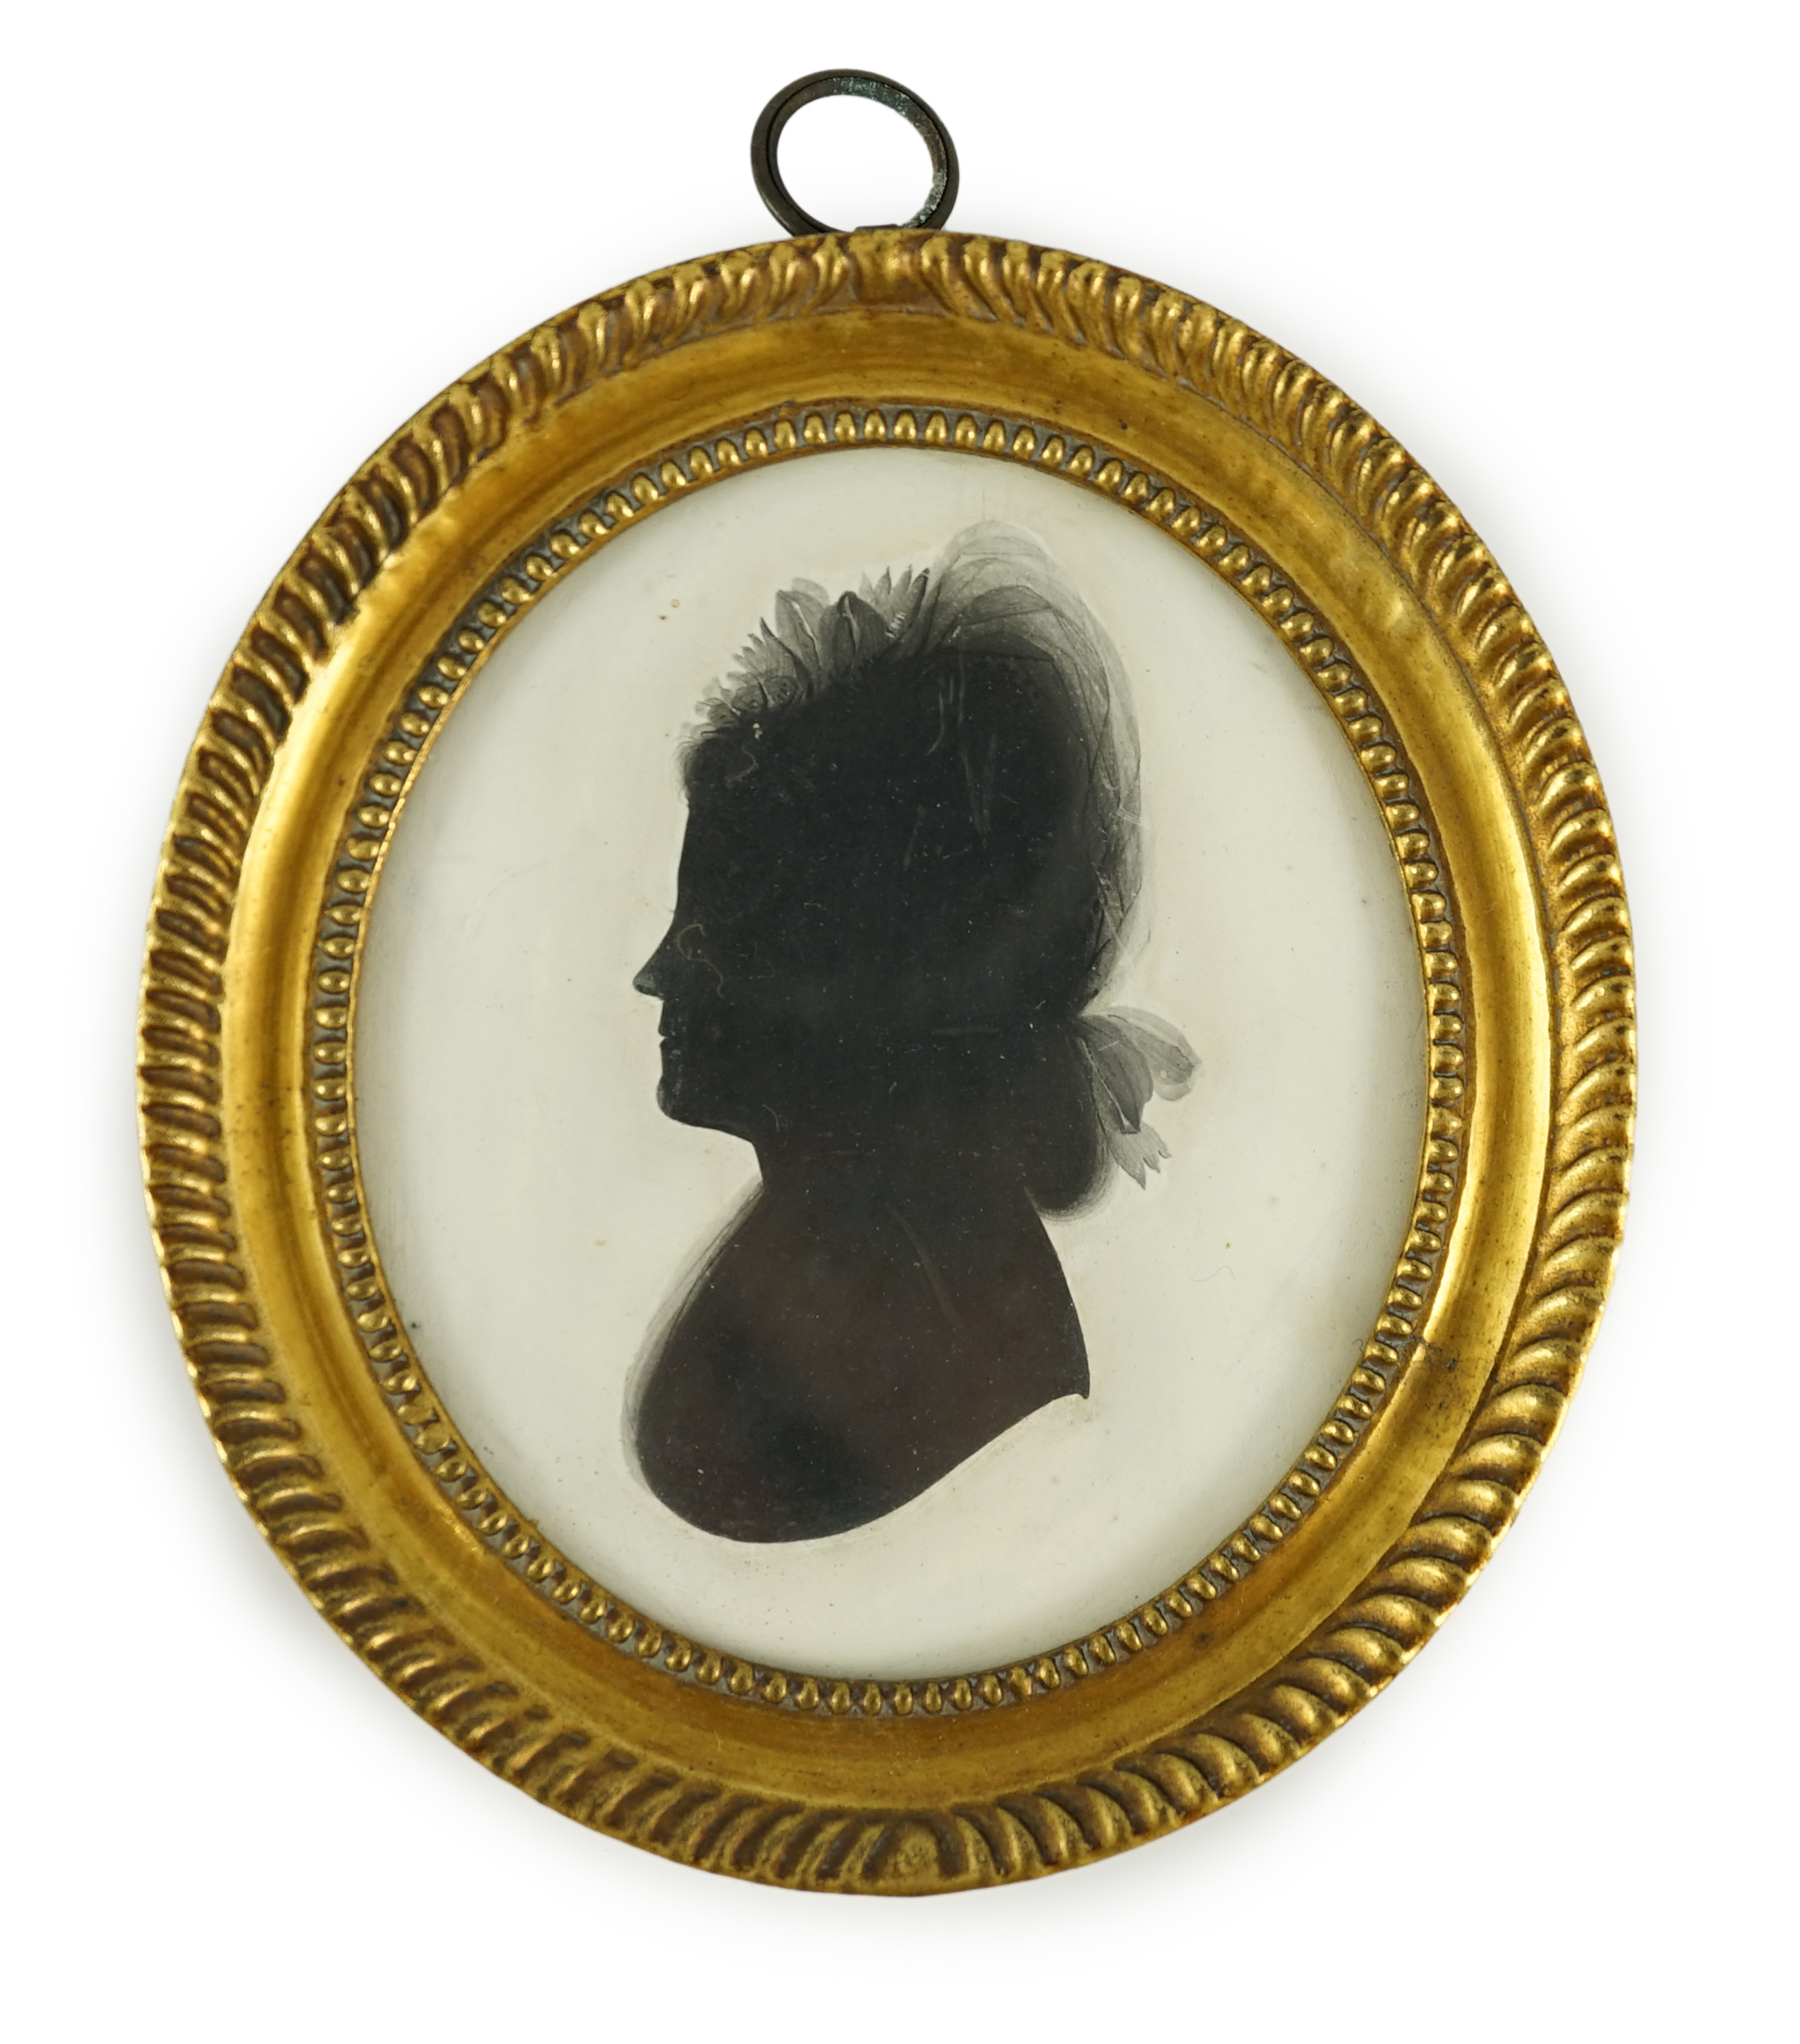 John Miers (1756-1821) and John Field (1772-1848), Silhouette of a lady, painted plaster, 7.5 x 6.5cm.